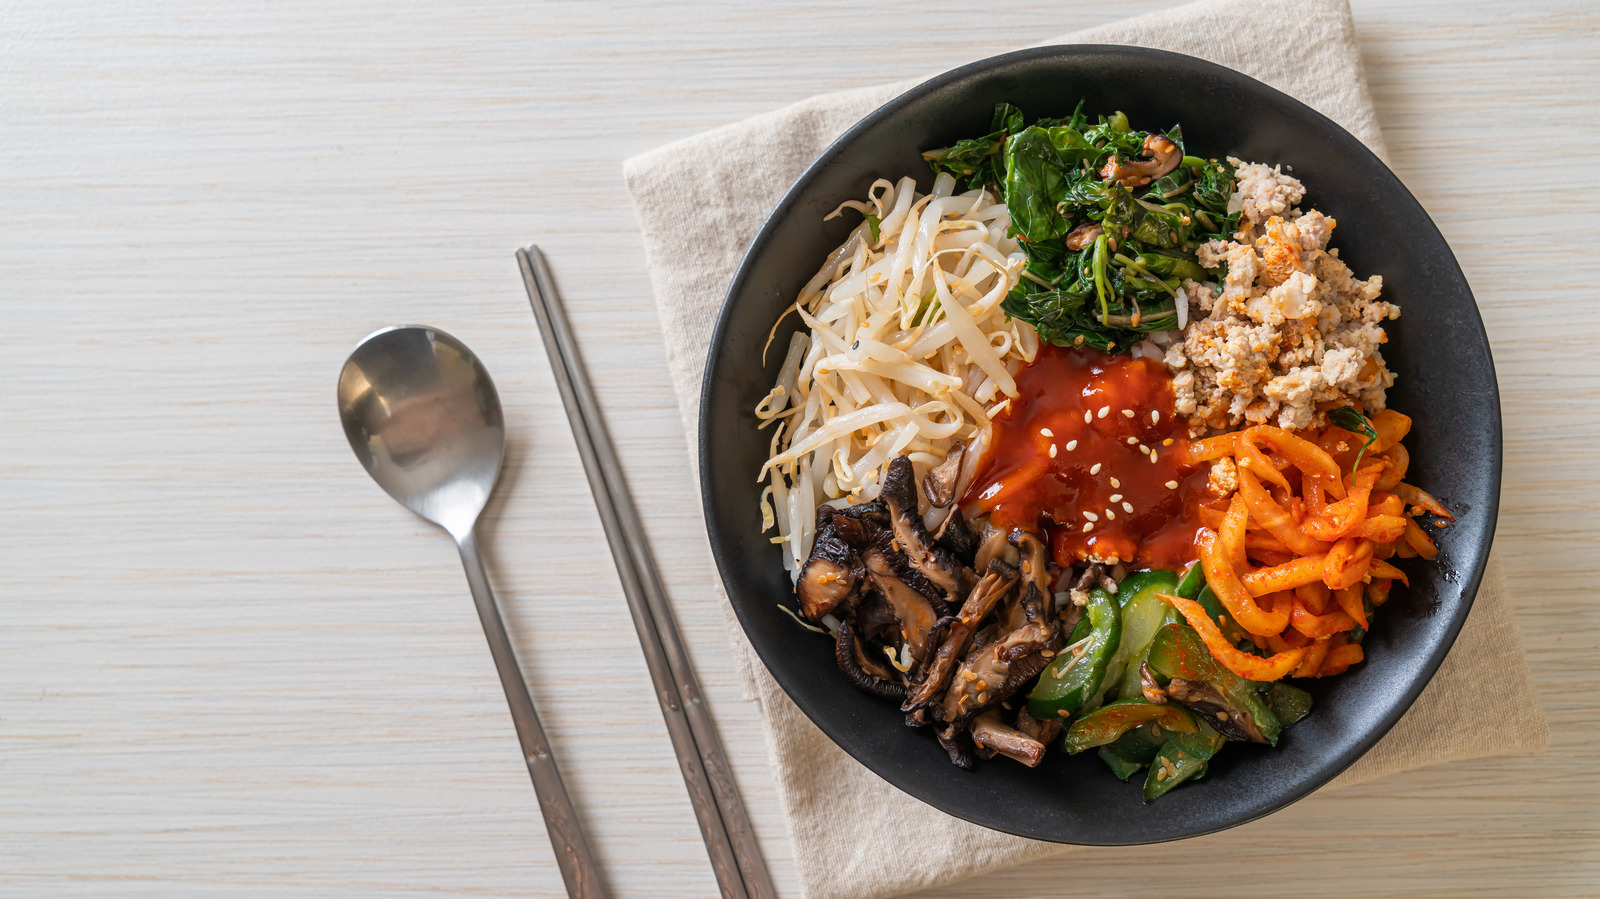 https://www.mashed.com/img/gallery/everything-you-need-to-know-about-bibimbap/l-intro-1619126062.jpg